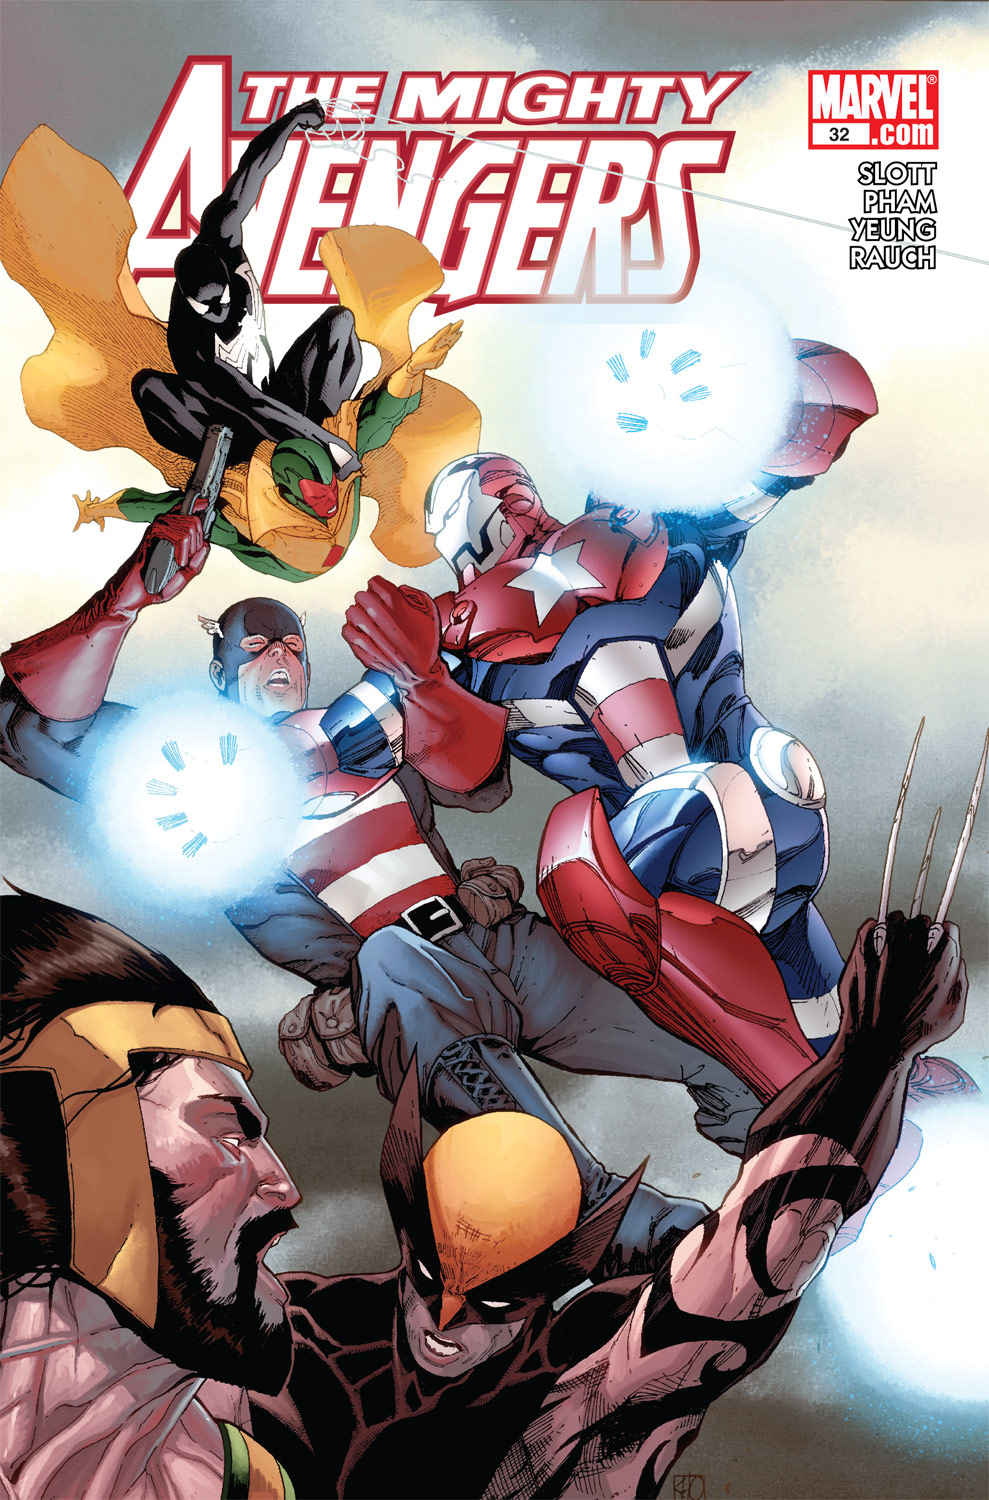 The Mighty Avengers (2007) #32